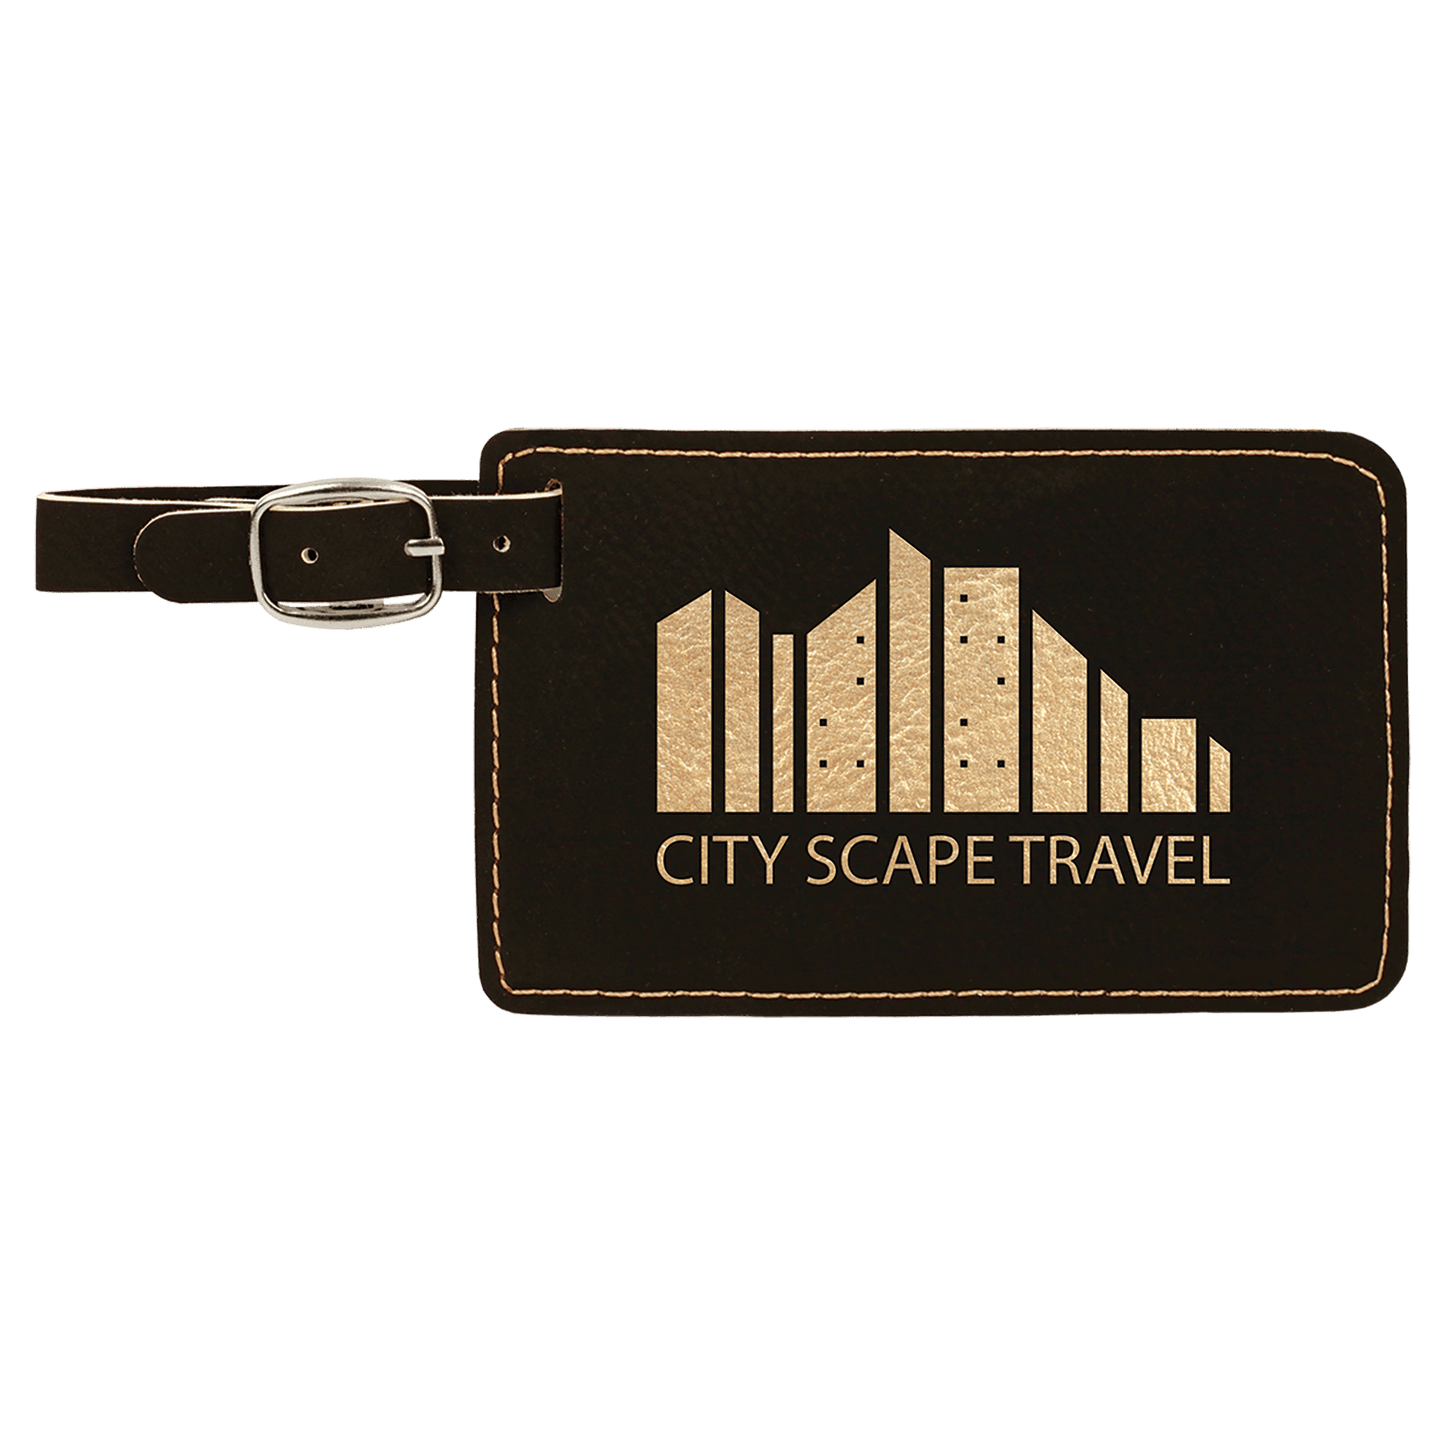 4 1/4" x 2 3/4" Black/Gold Laserable Leatherette Luggage Tag